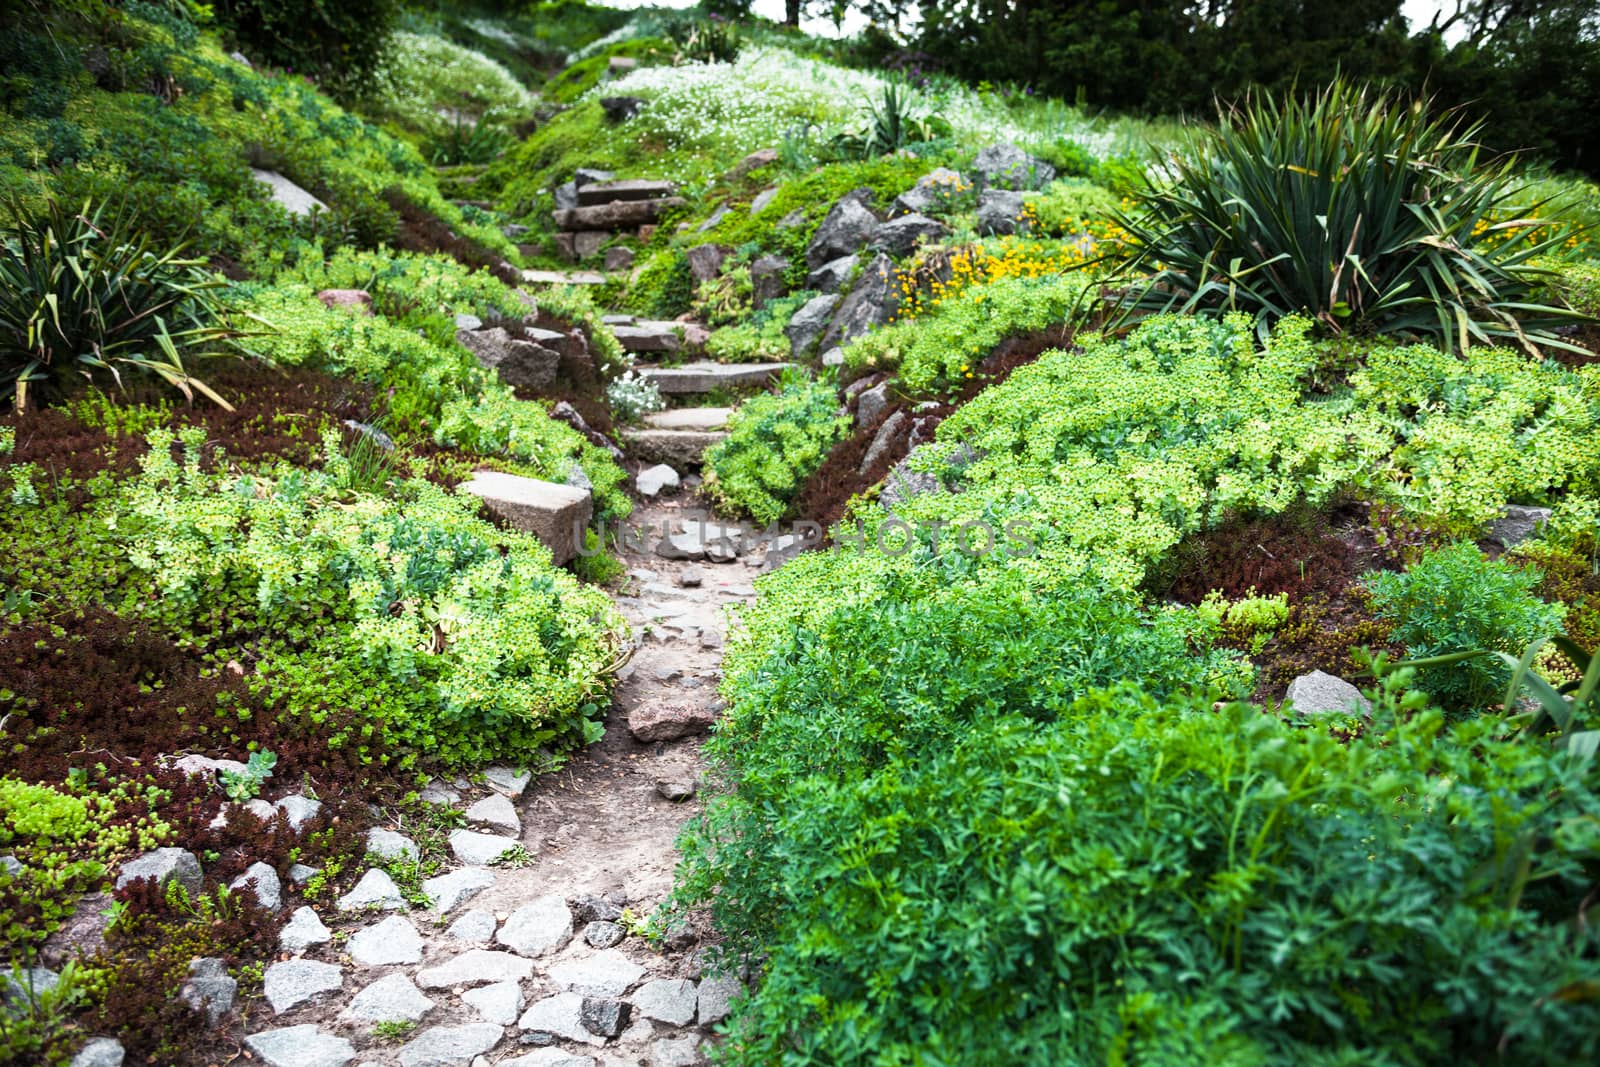 Stony path and stairs in the green garden by rootstocks